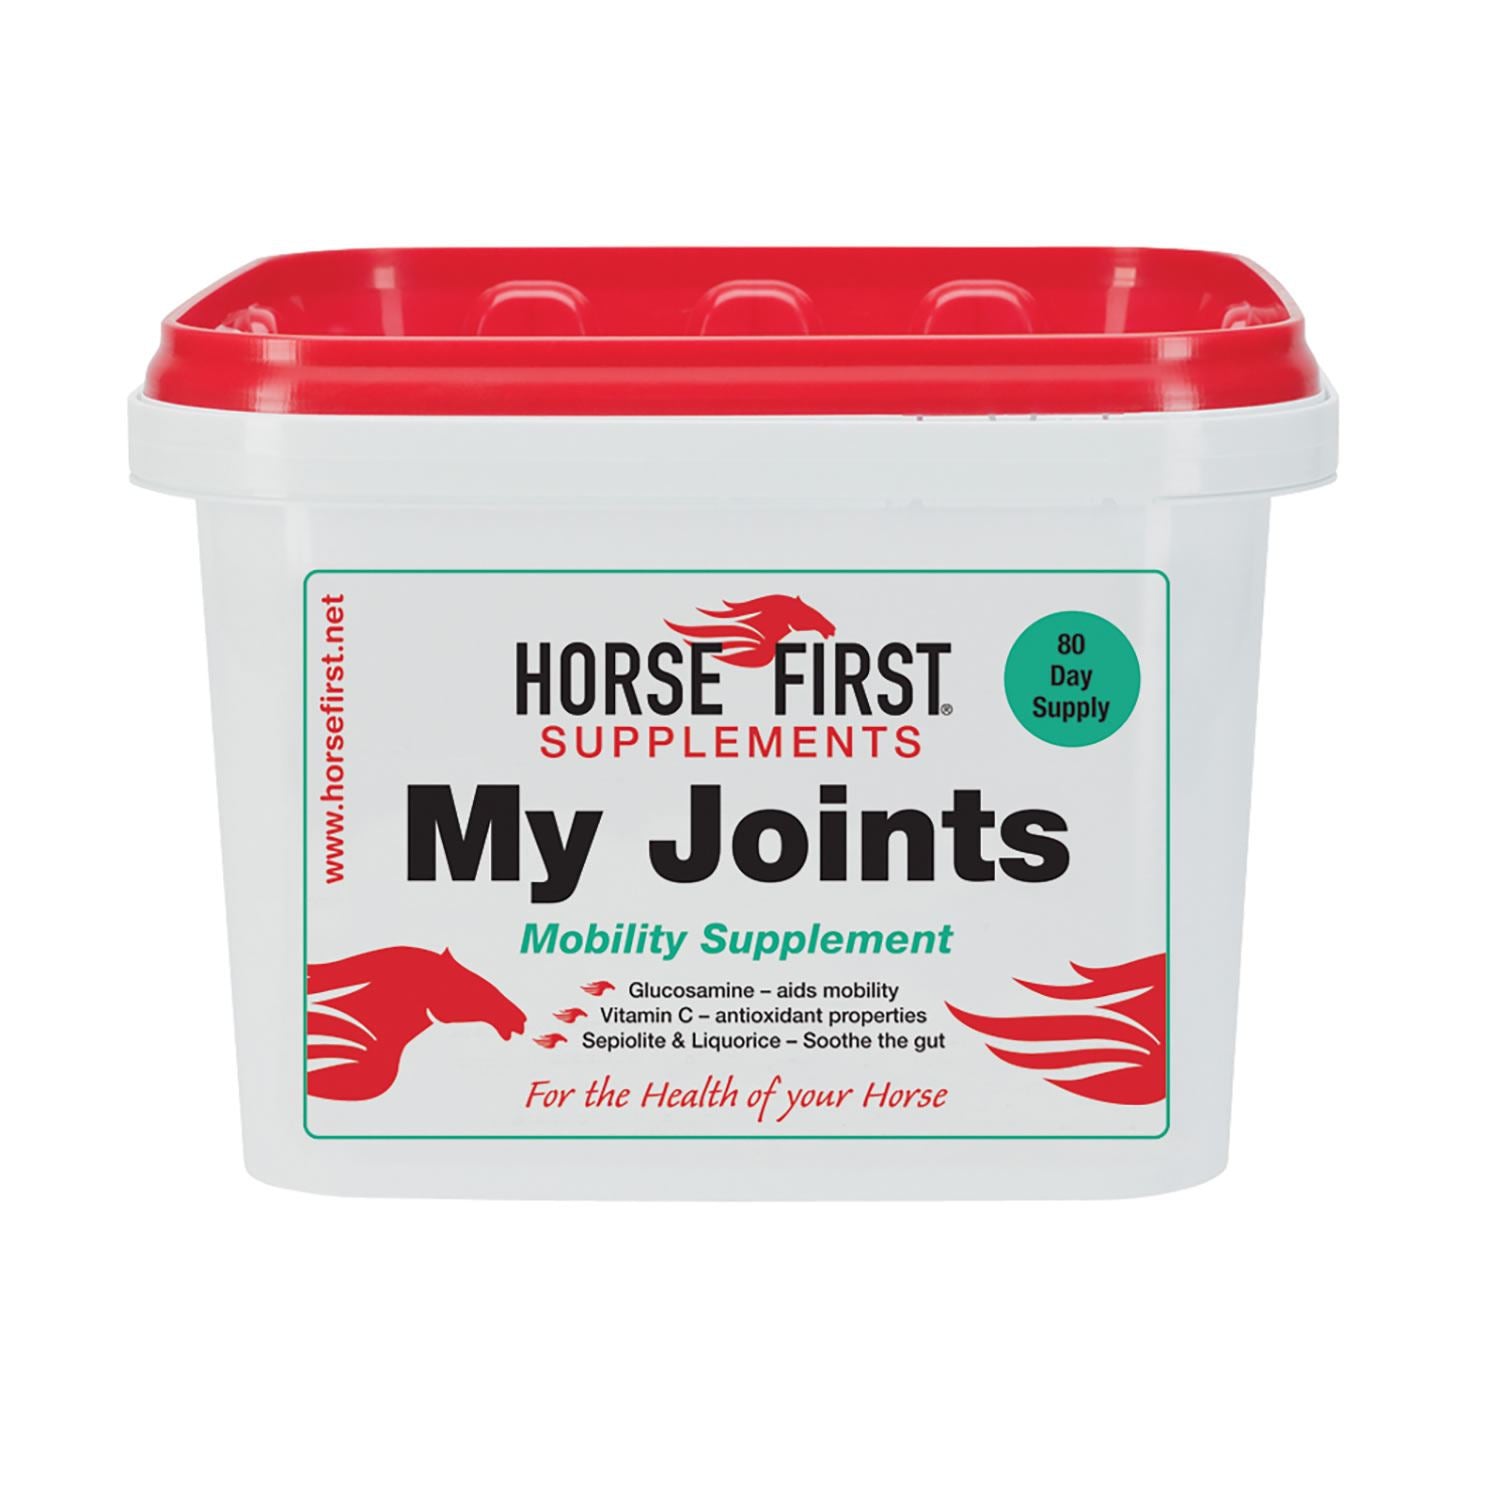 HORSE FIRST MY JOINTS - A premium-quality, high-specification mobility supplement for horses